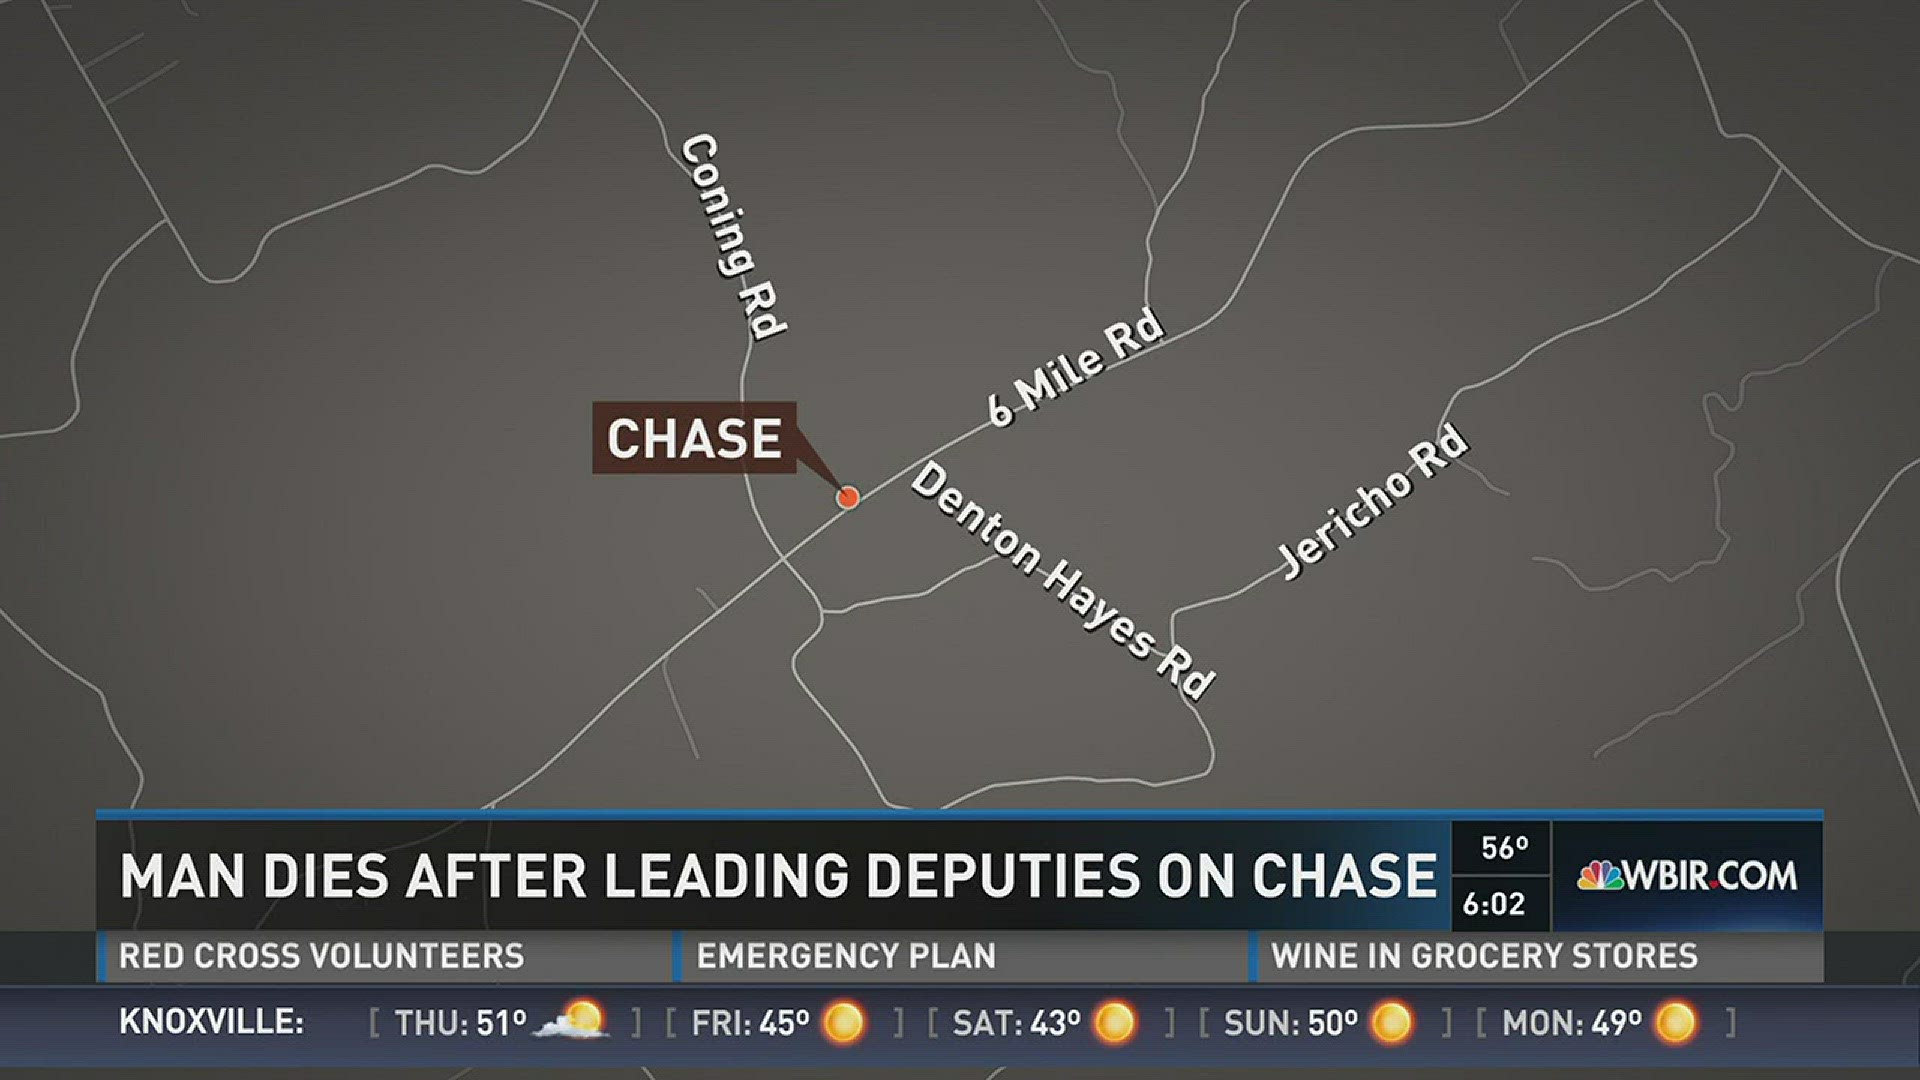 A man died Tuesday night after leading deputies on a chase in Blount County. Dec. 30, 2015